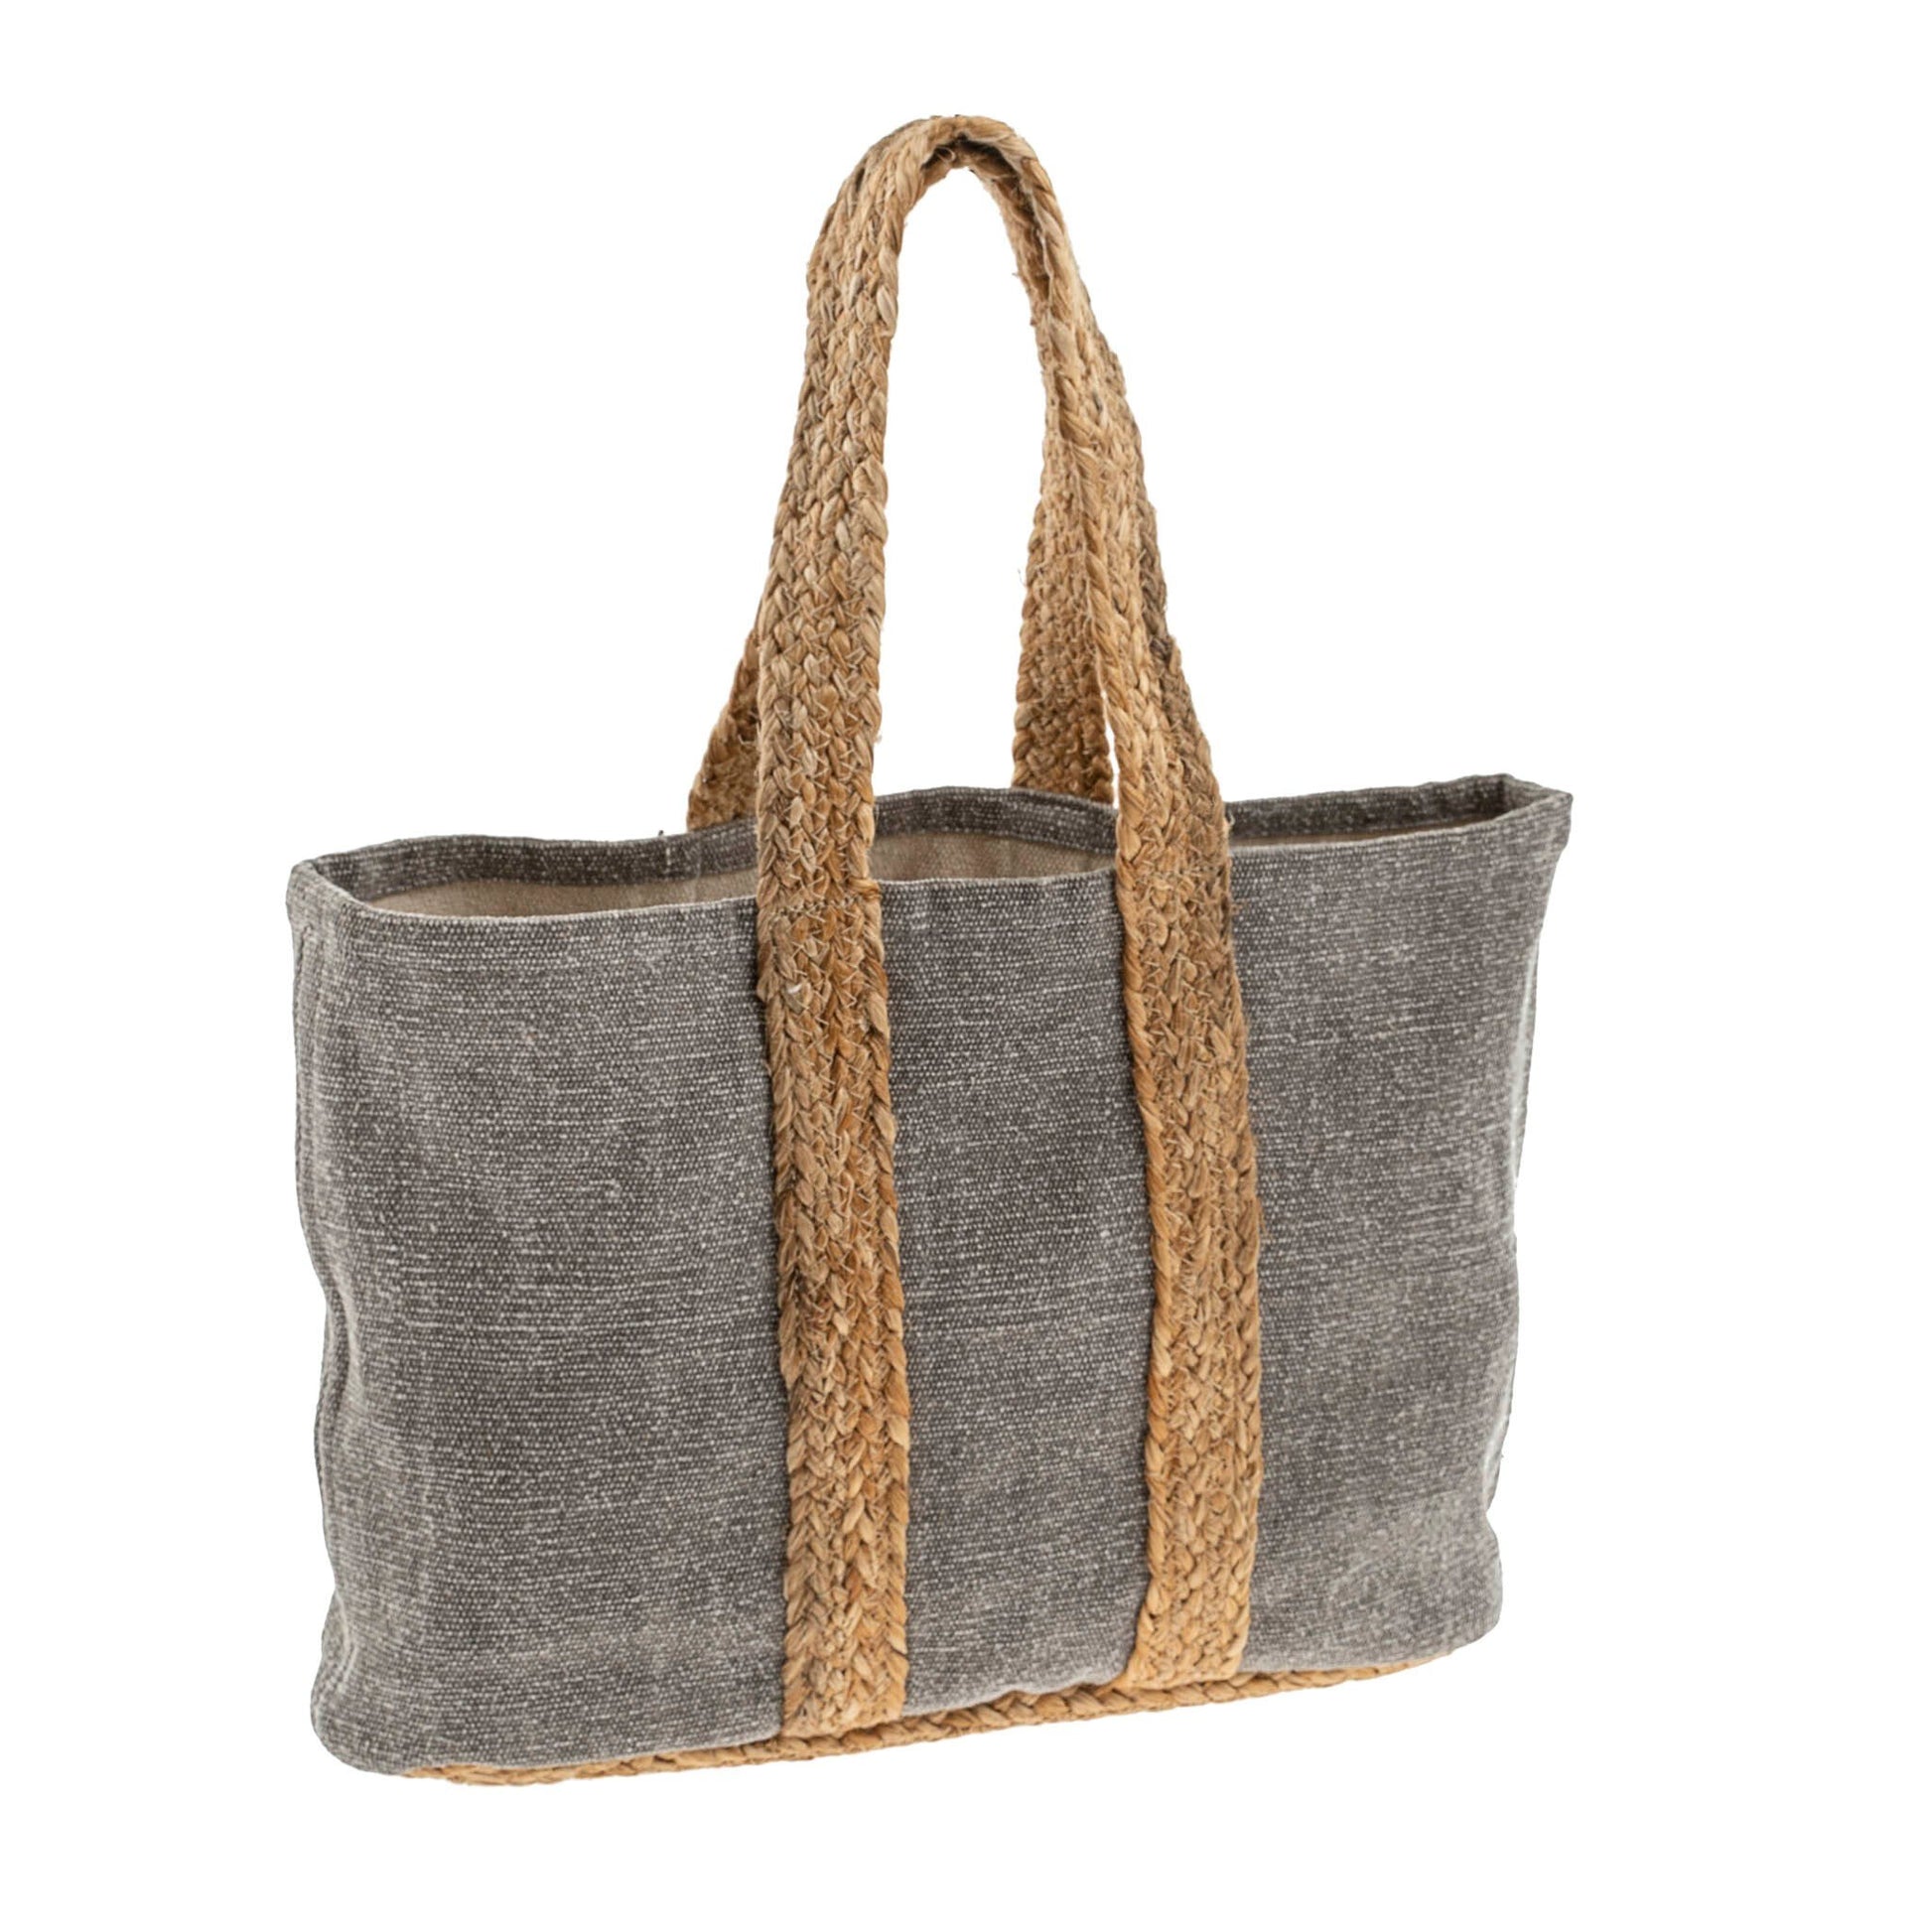 BREEZE MARKET TOTE living-homeaccents Indaba trading co Grey  